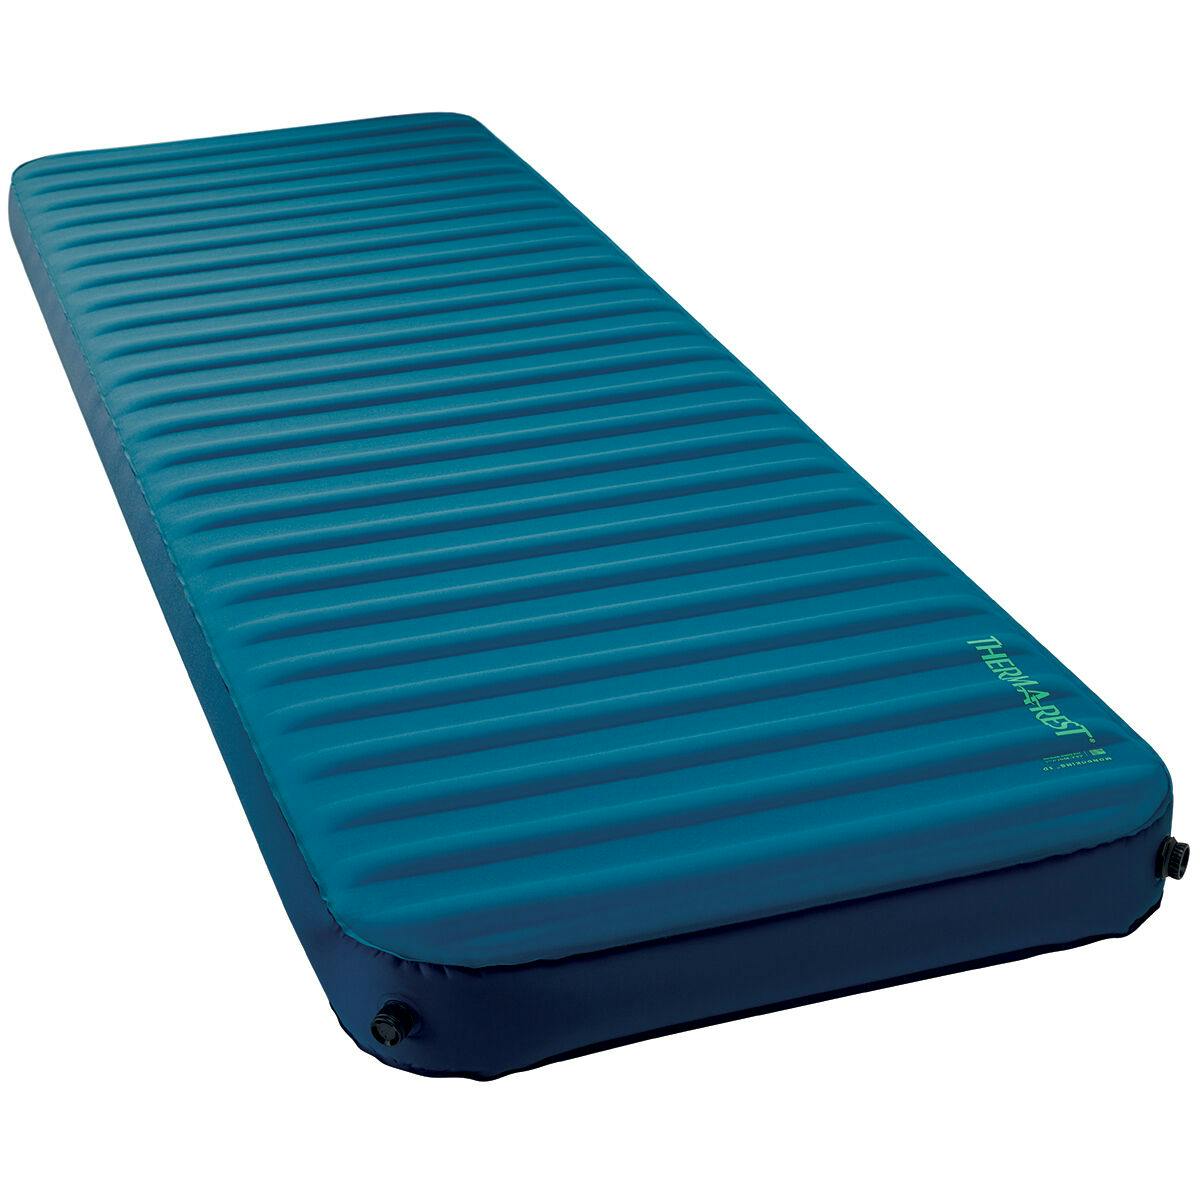 Therm-a-Rest MondoKing 3D Sleeping Pad